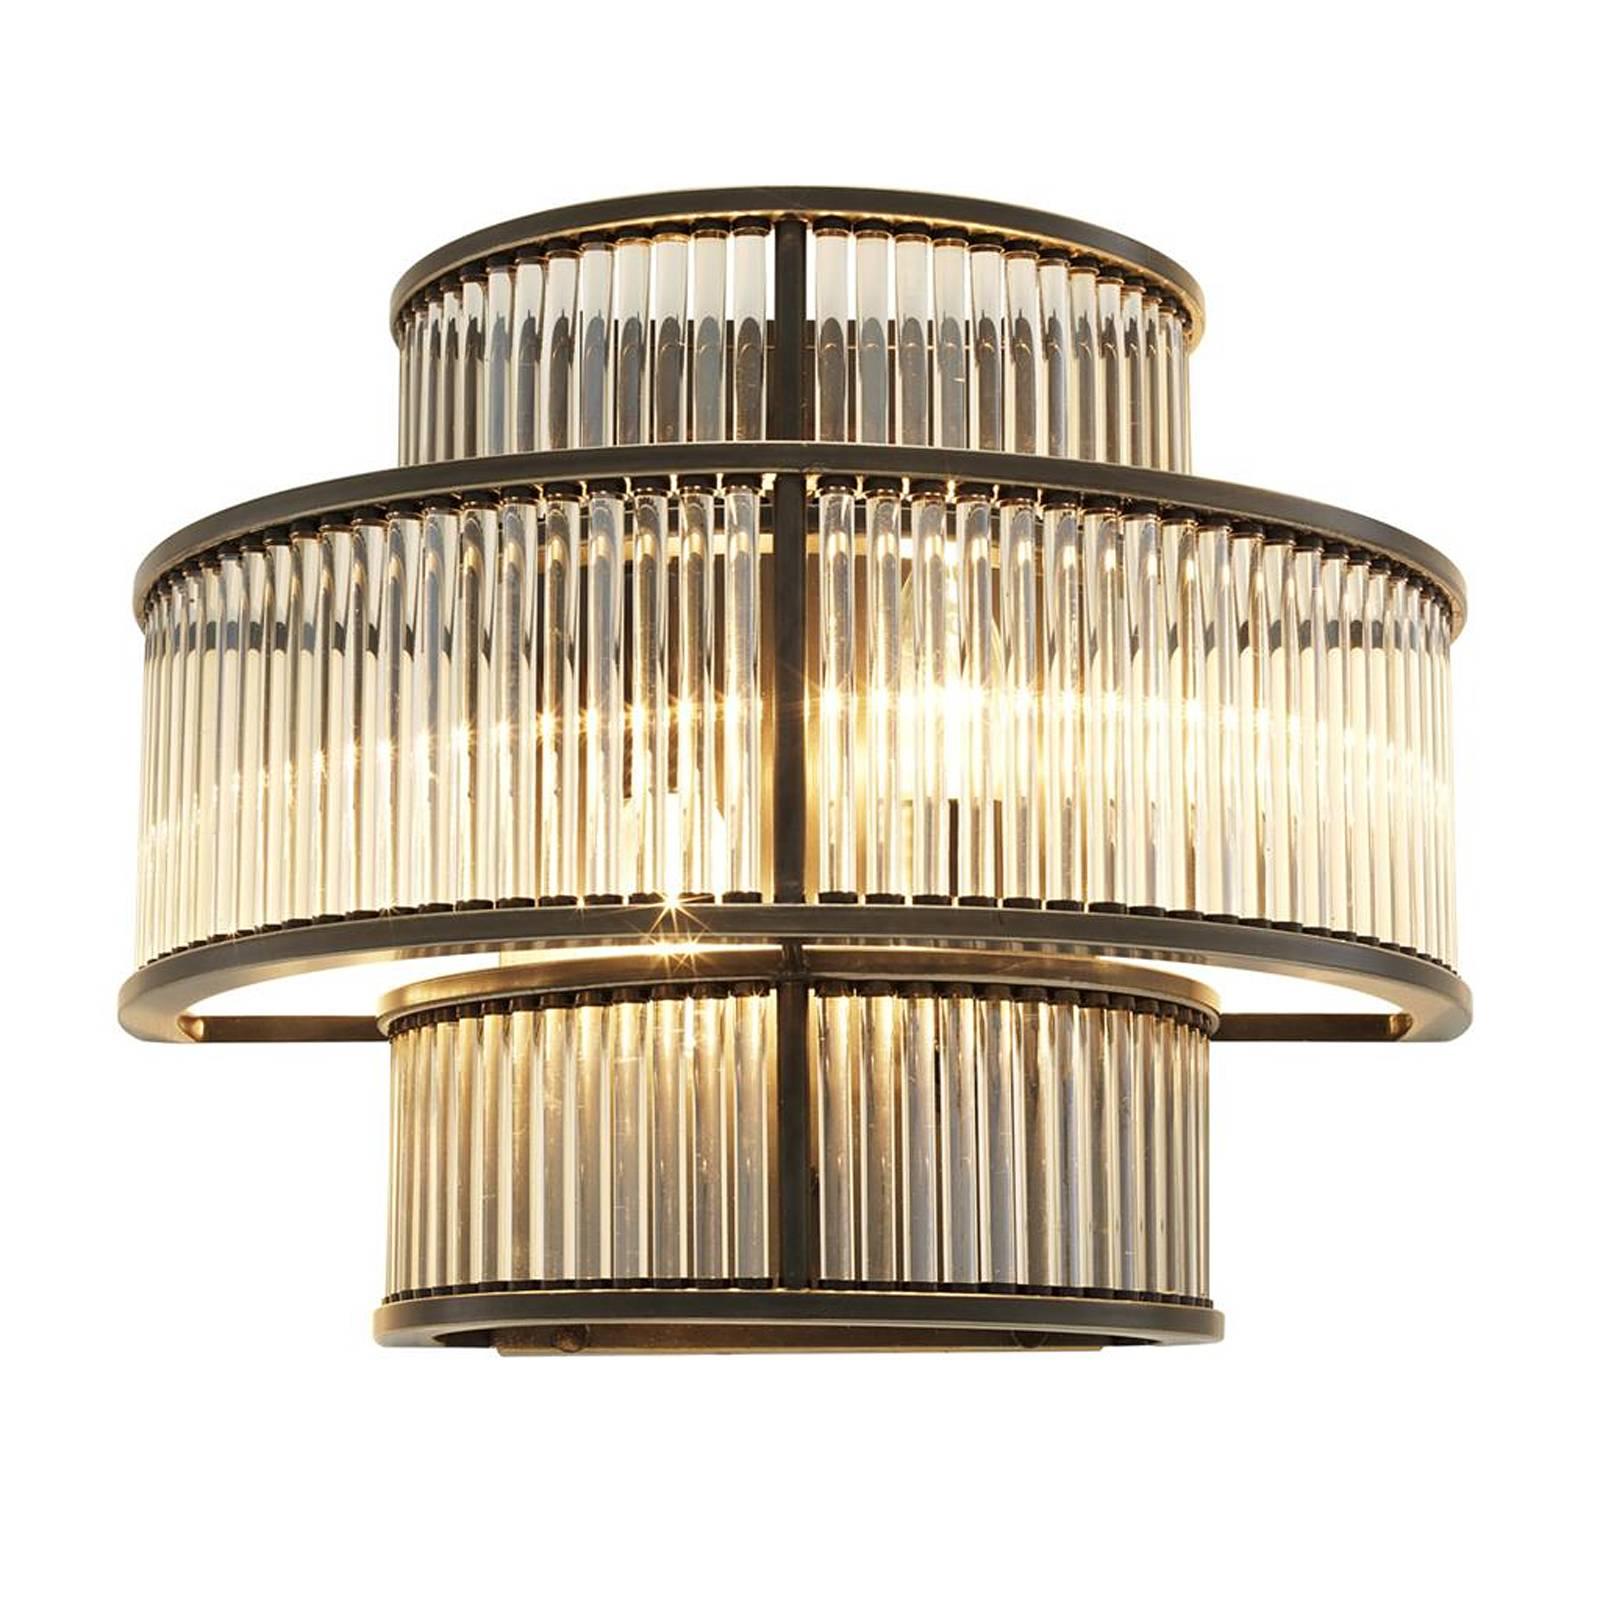 Contemporary Glass Stairs Wall Lamp in Bronze Highlight Finish or in Nickel Finish